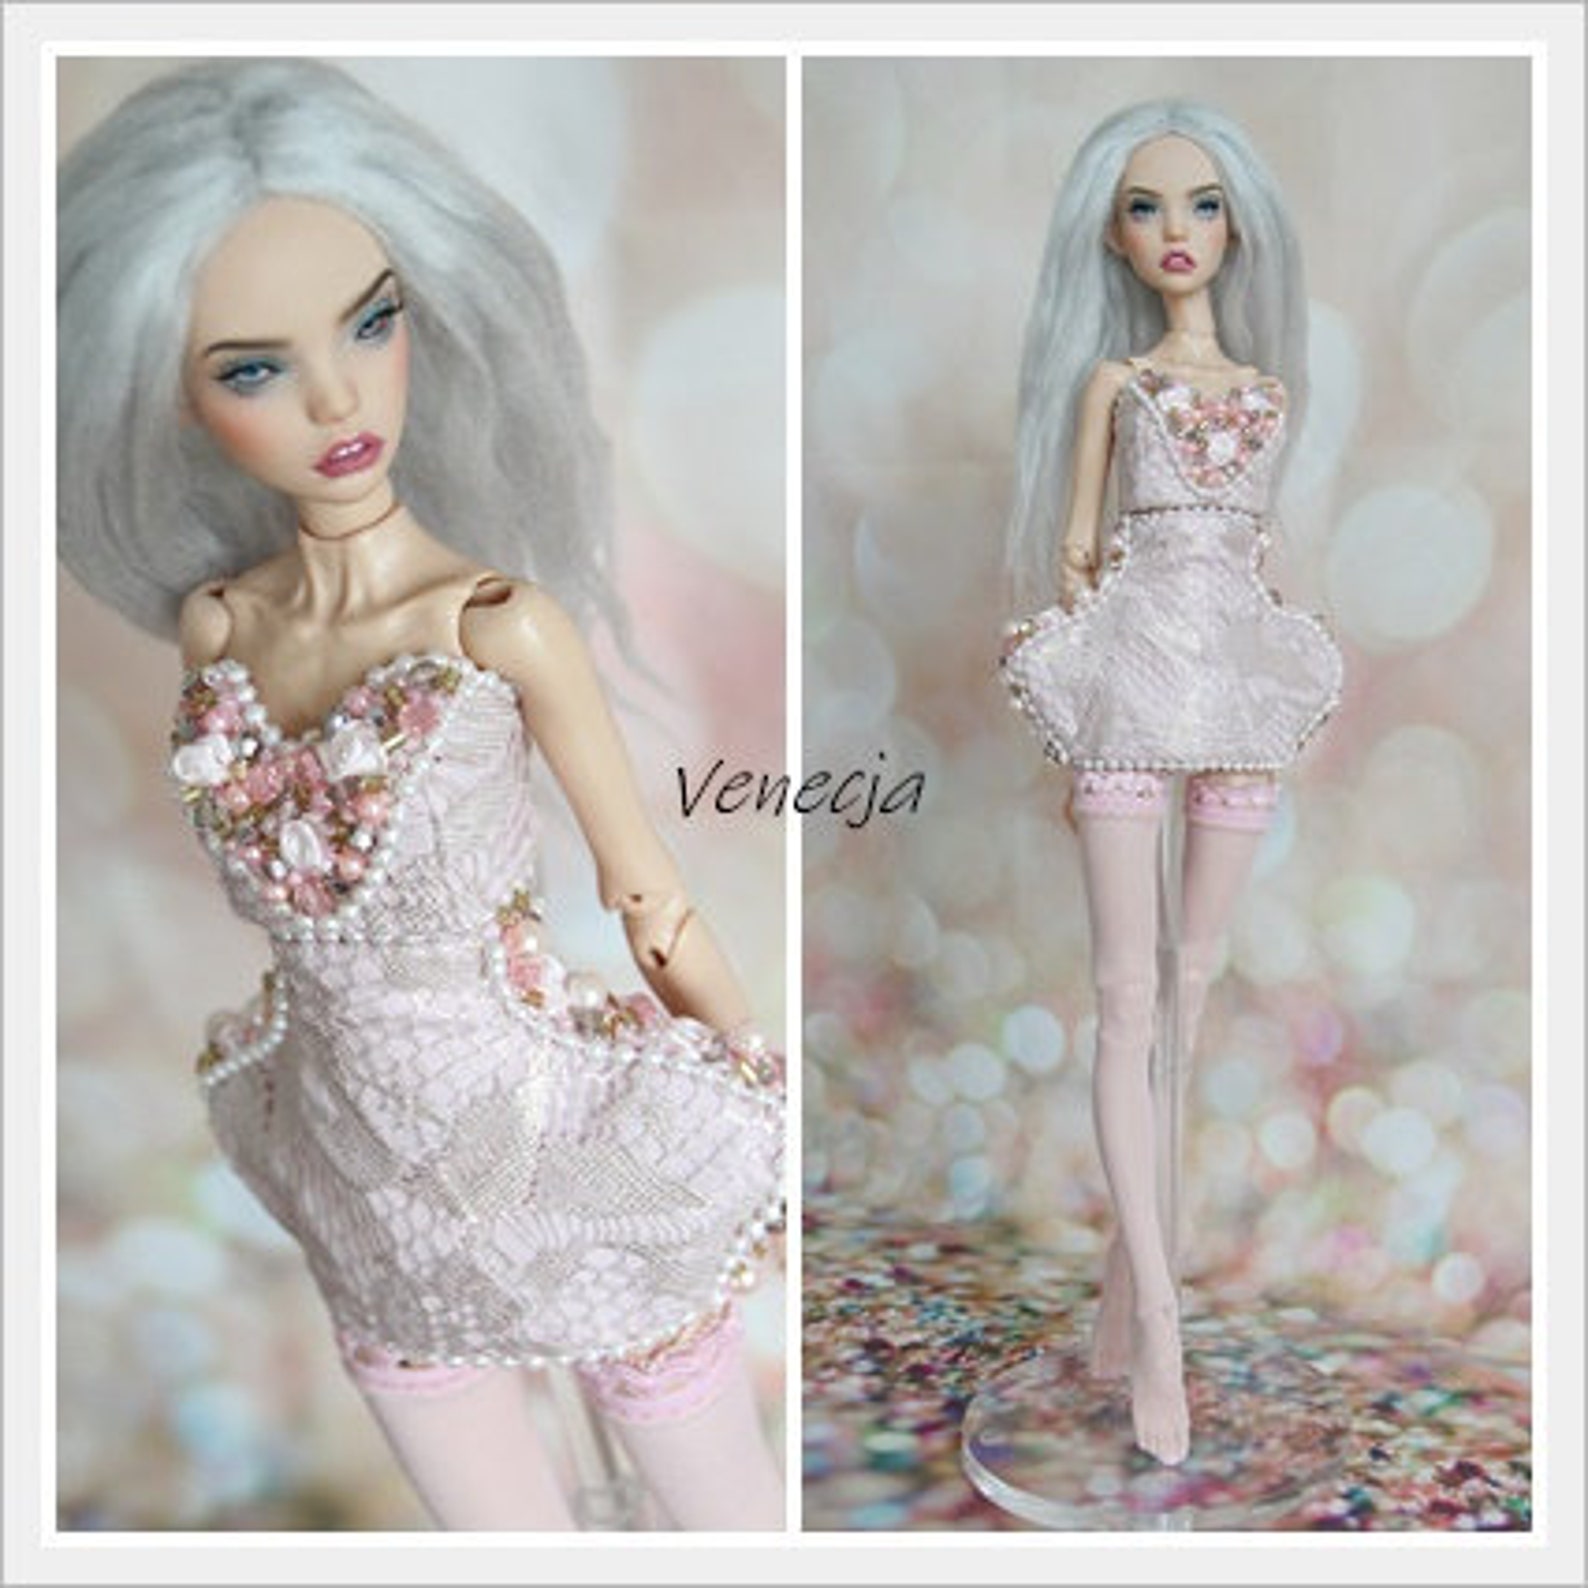 Venecja Outfit For Msd Popovy Sisters And Doll Menagerie Etsy